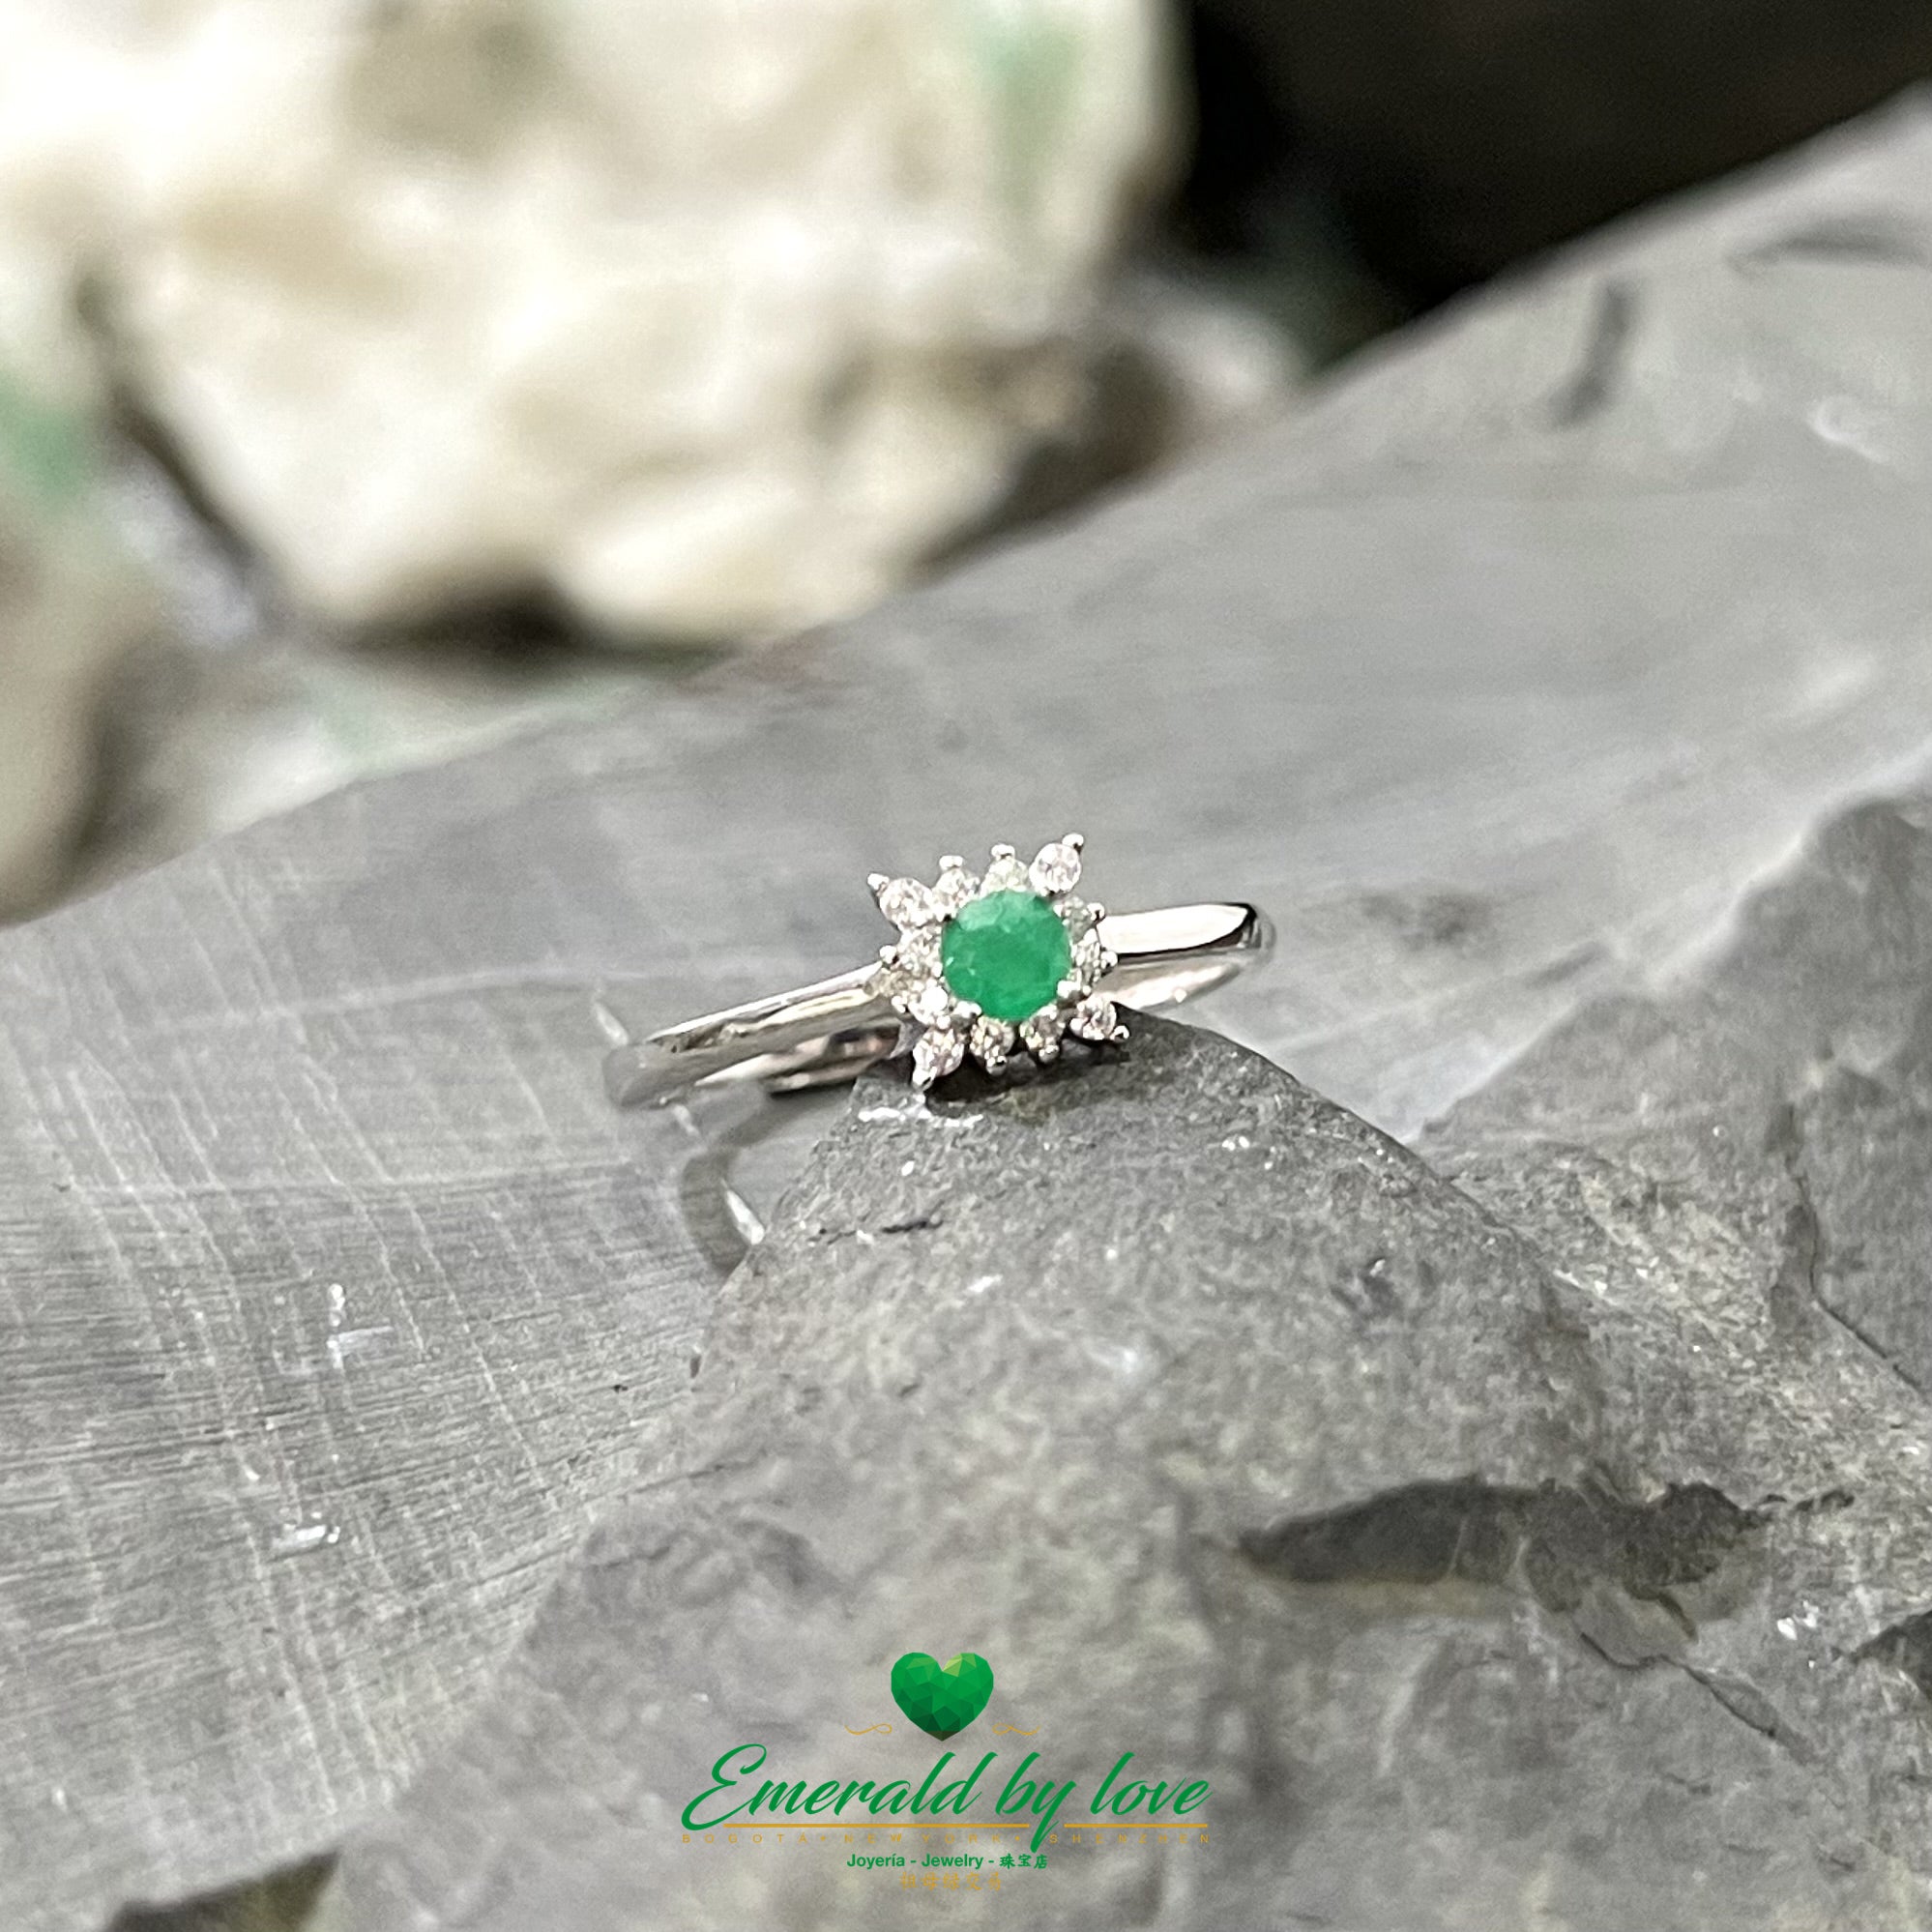 Four-Petal Silver Flower Ring with Central Emerald and Zirconia Accents